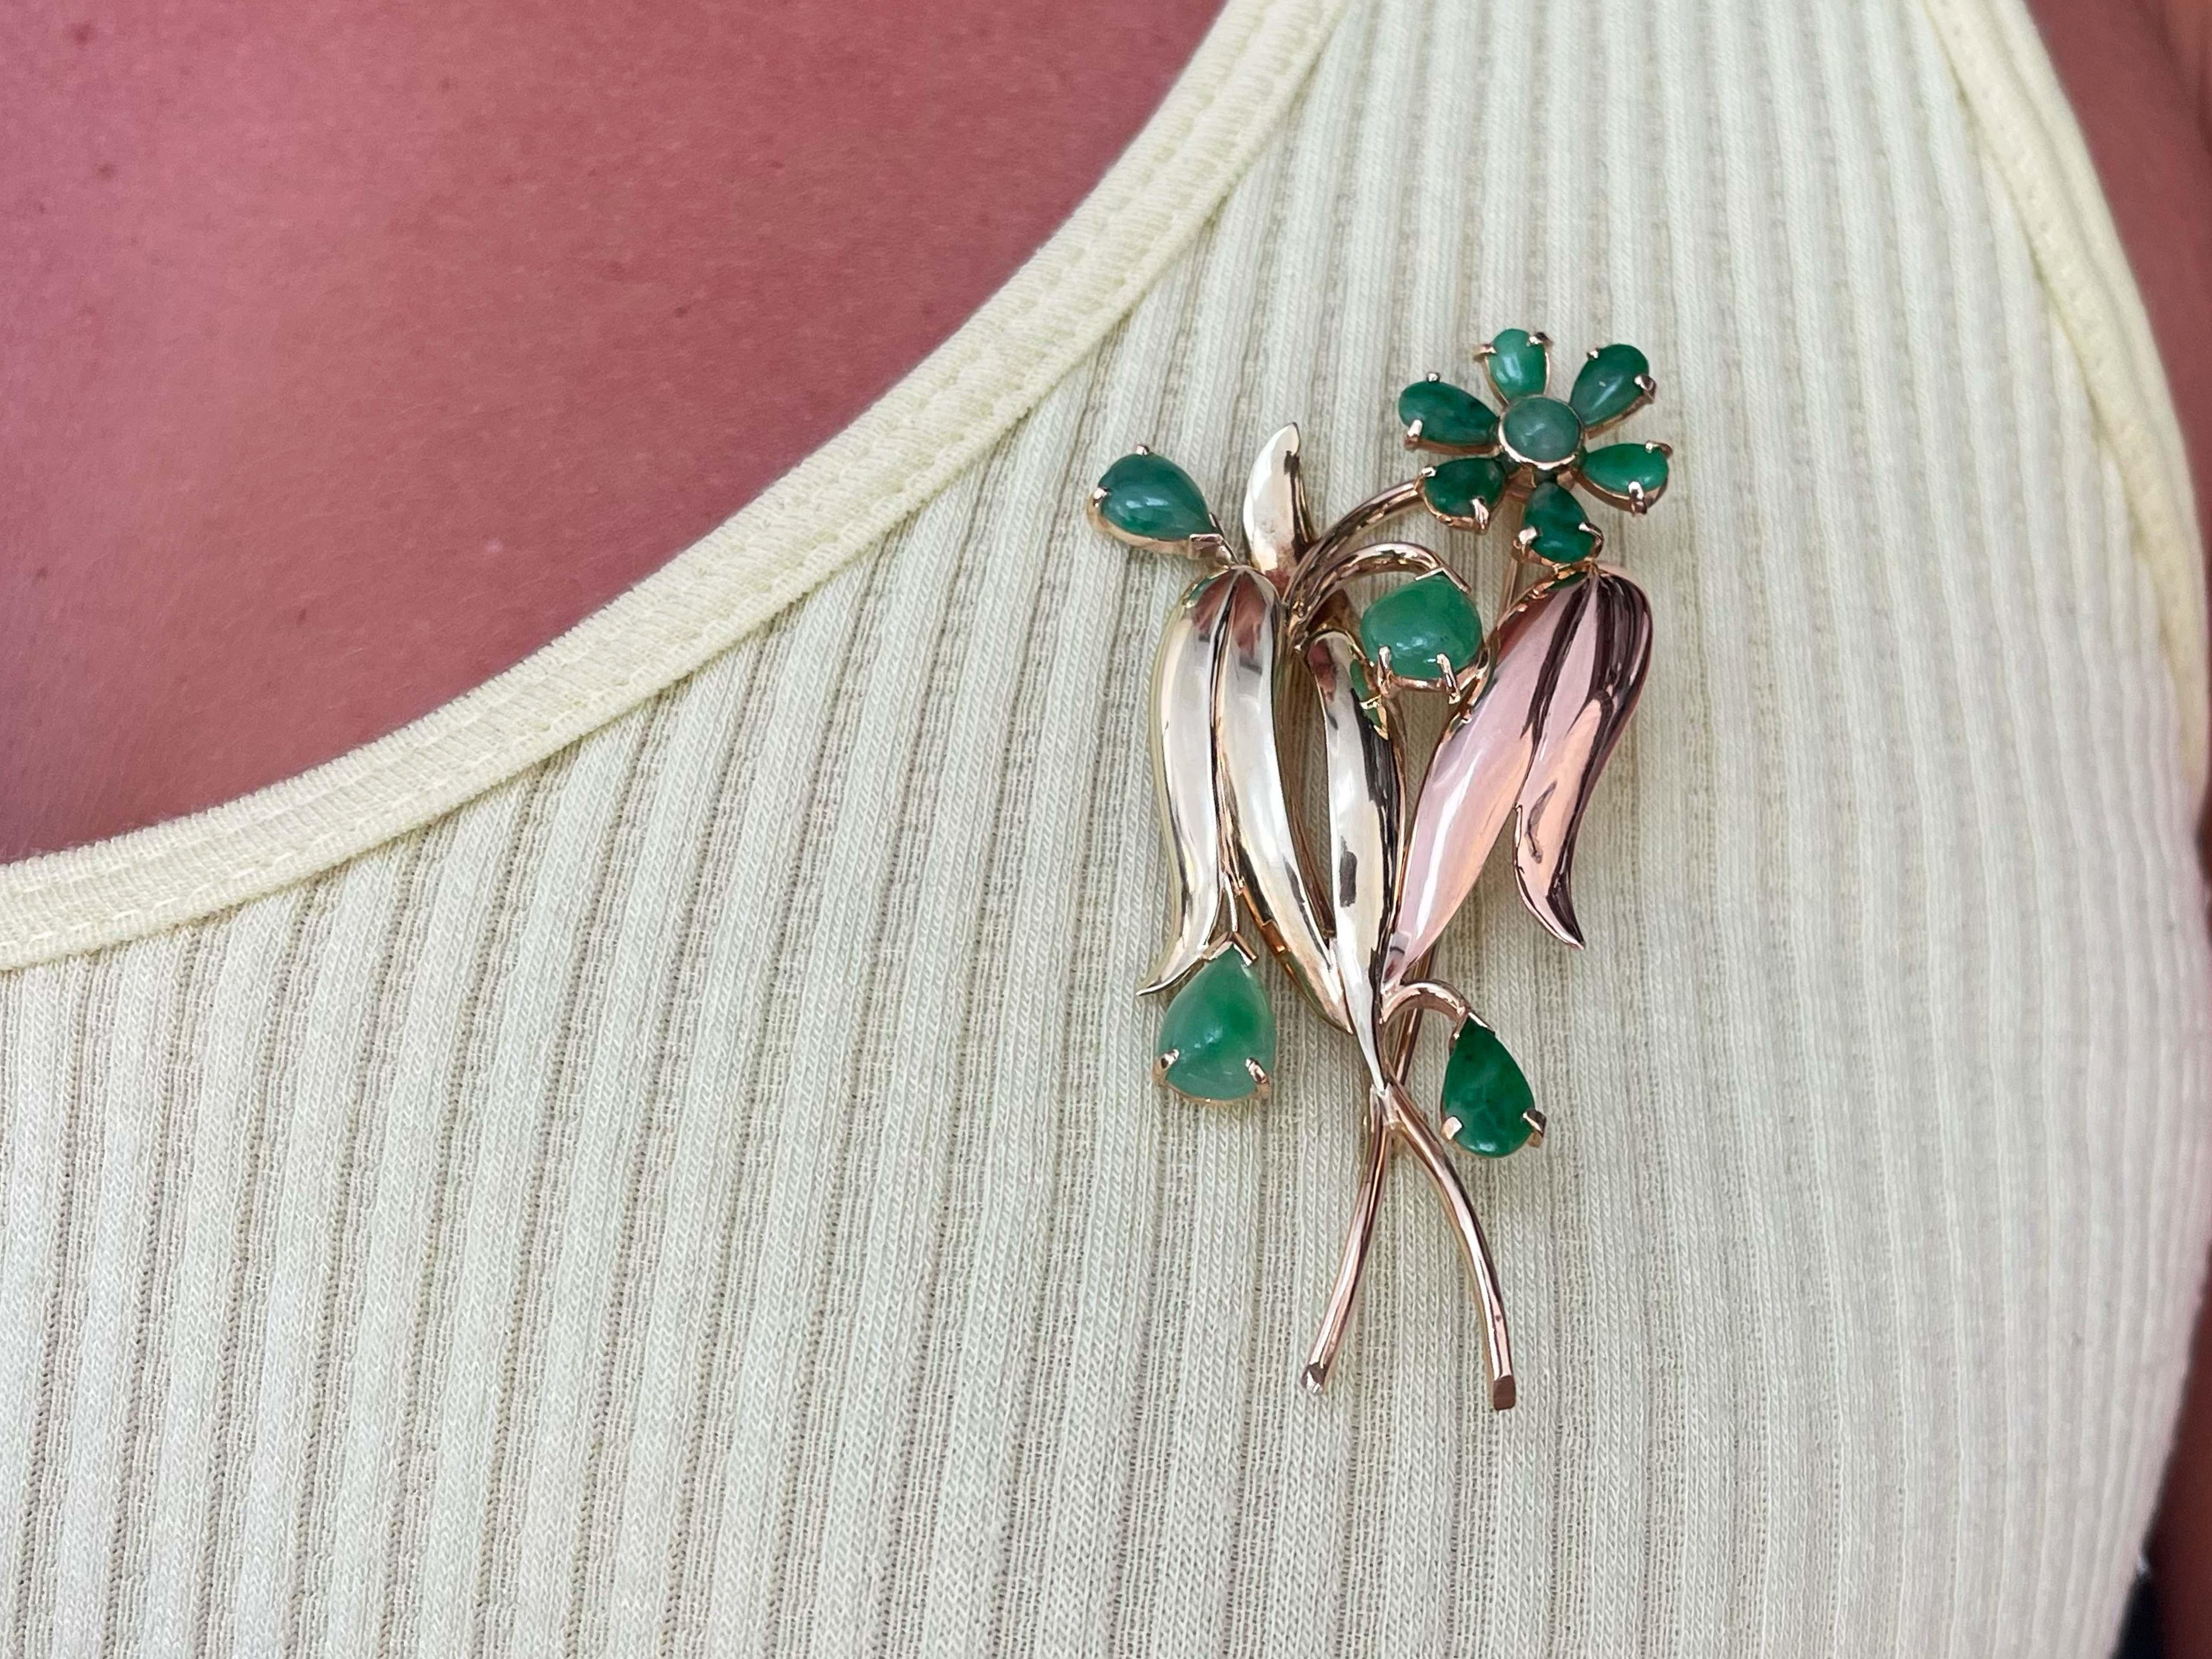 Brooch Specifications:

Metal: 14k Yellow and Rose Gold

Total Weight: 14.9 Grams

Stone: Green Jadeite Jade 

Brooch Measurements: 2.75